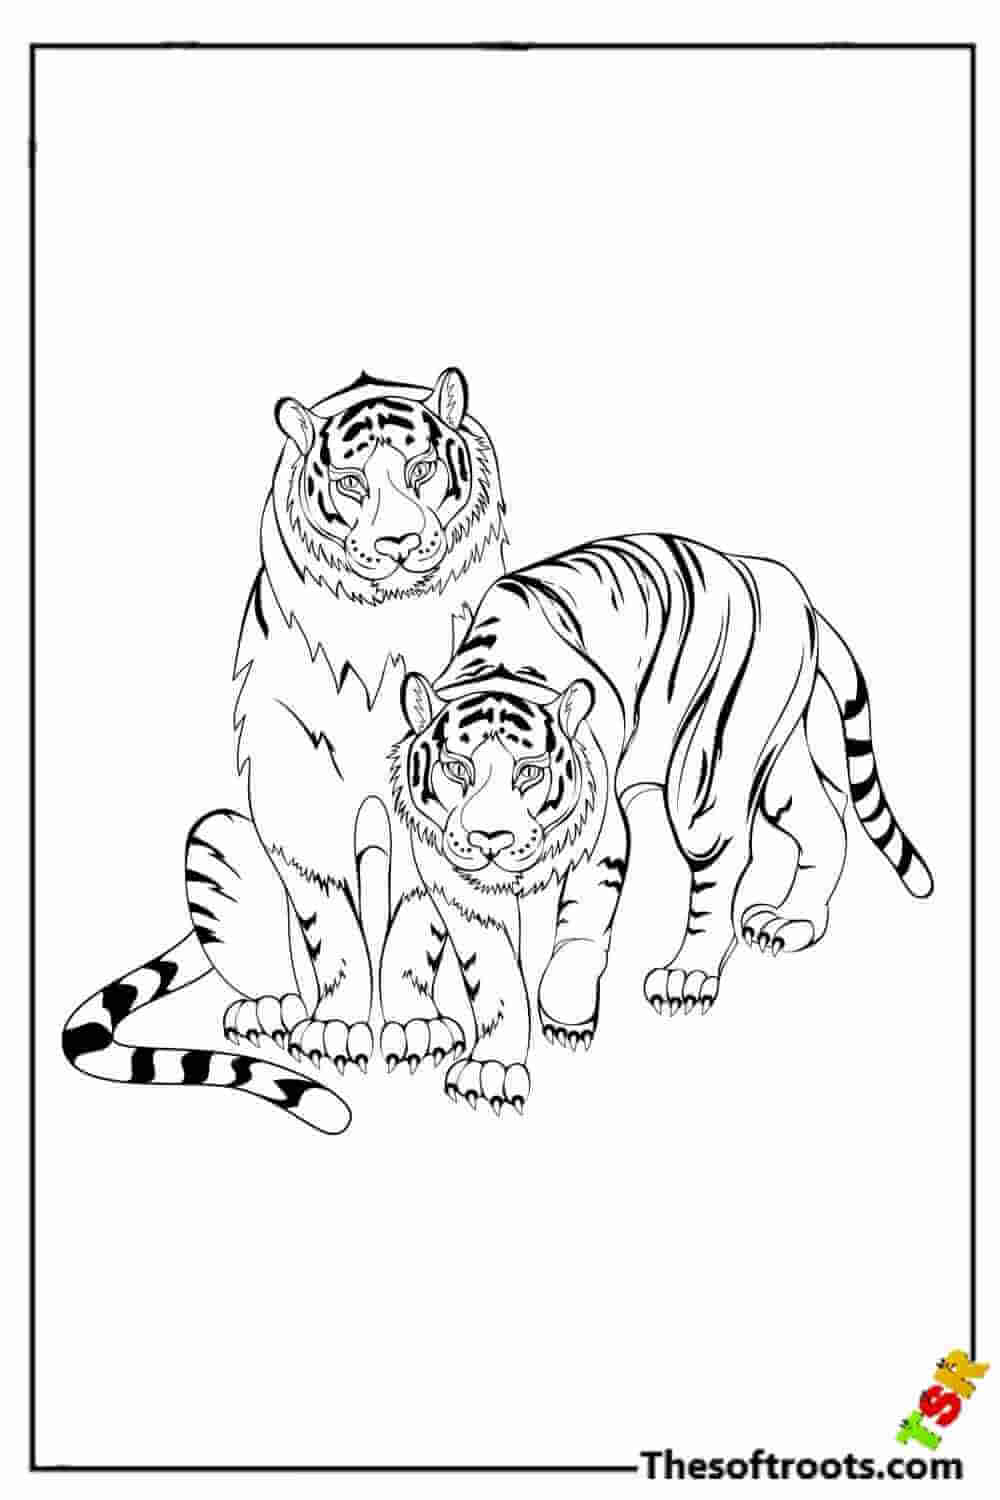 Two realistic tiger friends coloring pages